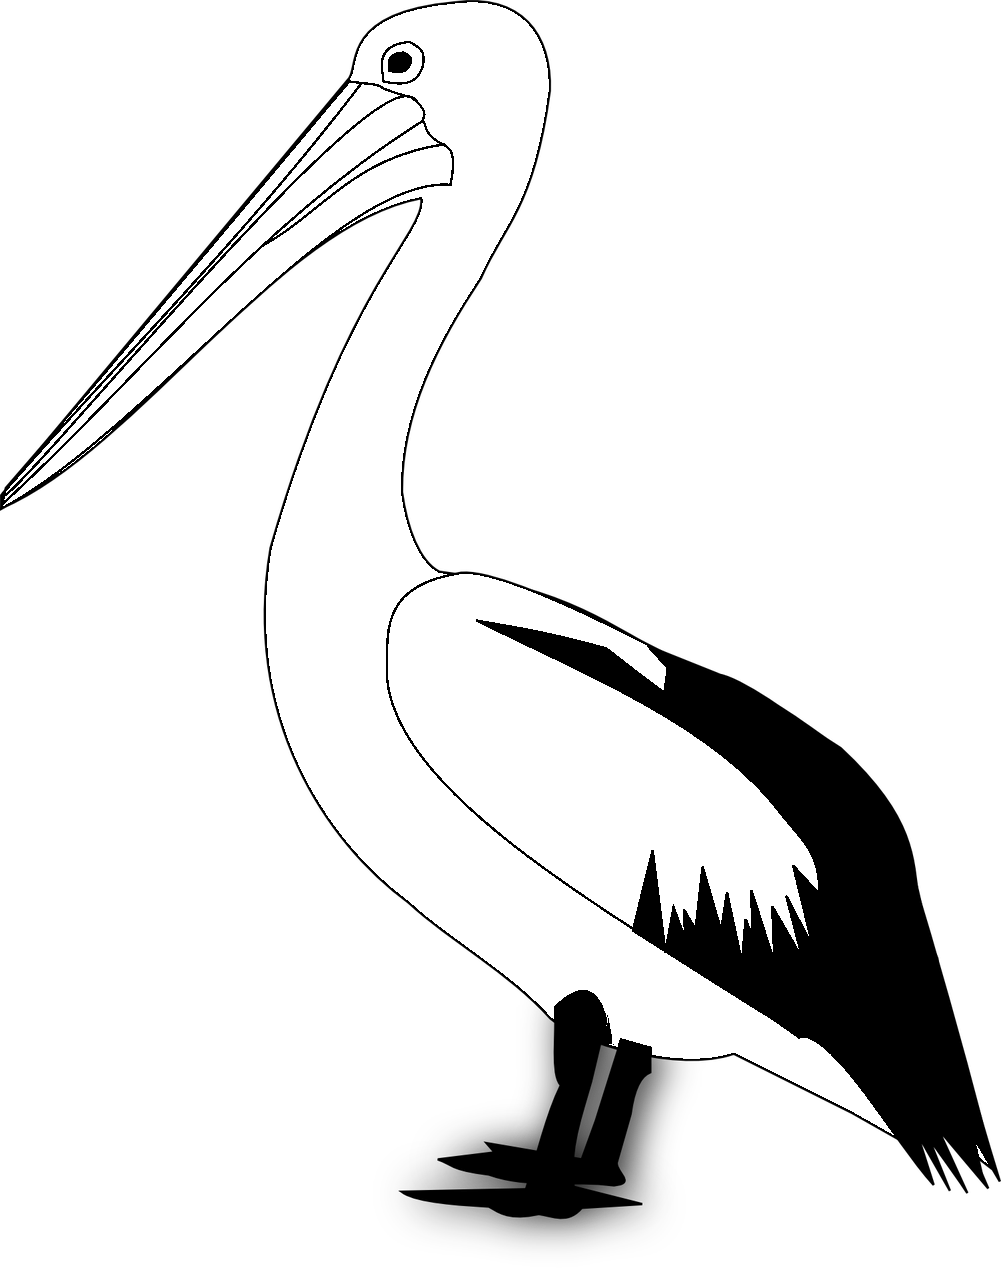 Coloring page of a pelican